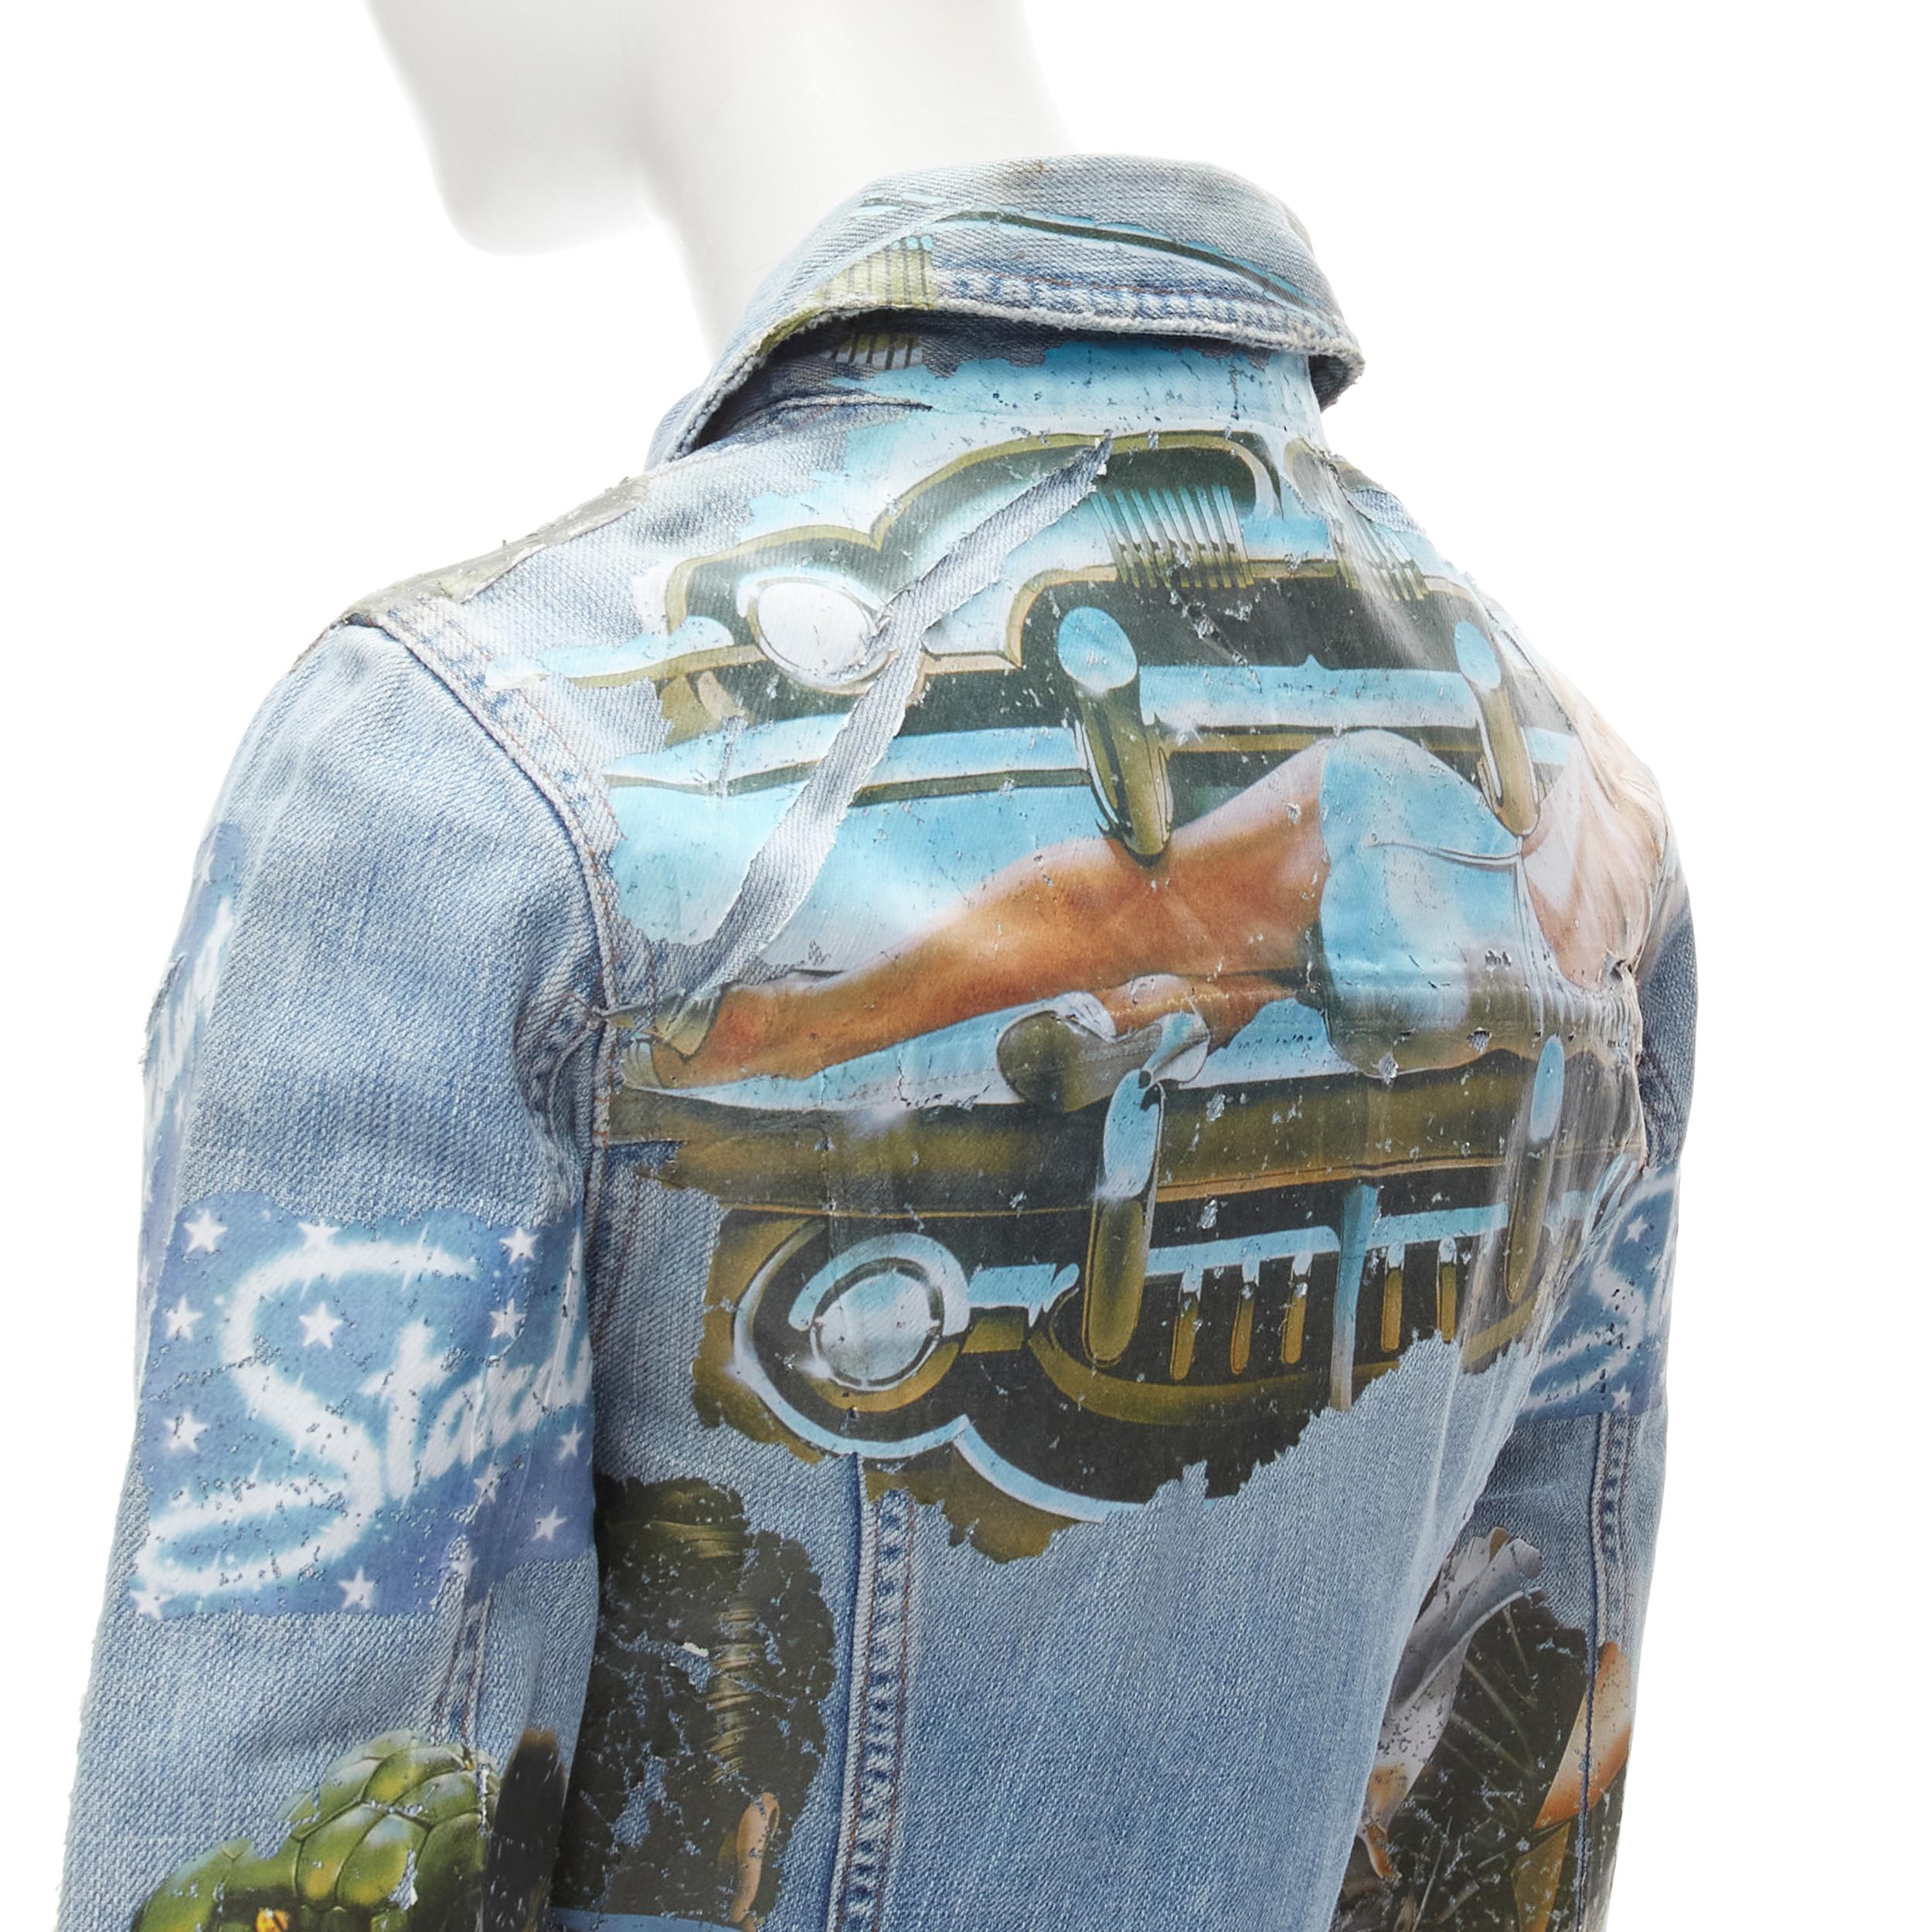 D&G DOLCE GABBANA Vintage Y2K pin up girls retro car denim jacket XS 
Reference: ANWU/A00702 
Brand: D&G 
Material: Cotton 
Color: Blue 
Closure: Button 
Extra Detail: Distressed patched print for vintage effect. Button front closure. 
Made in: